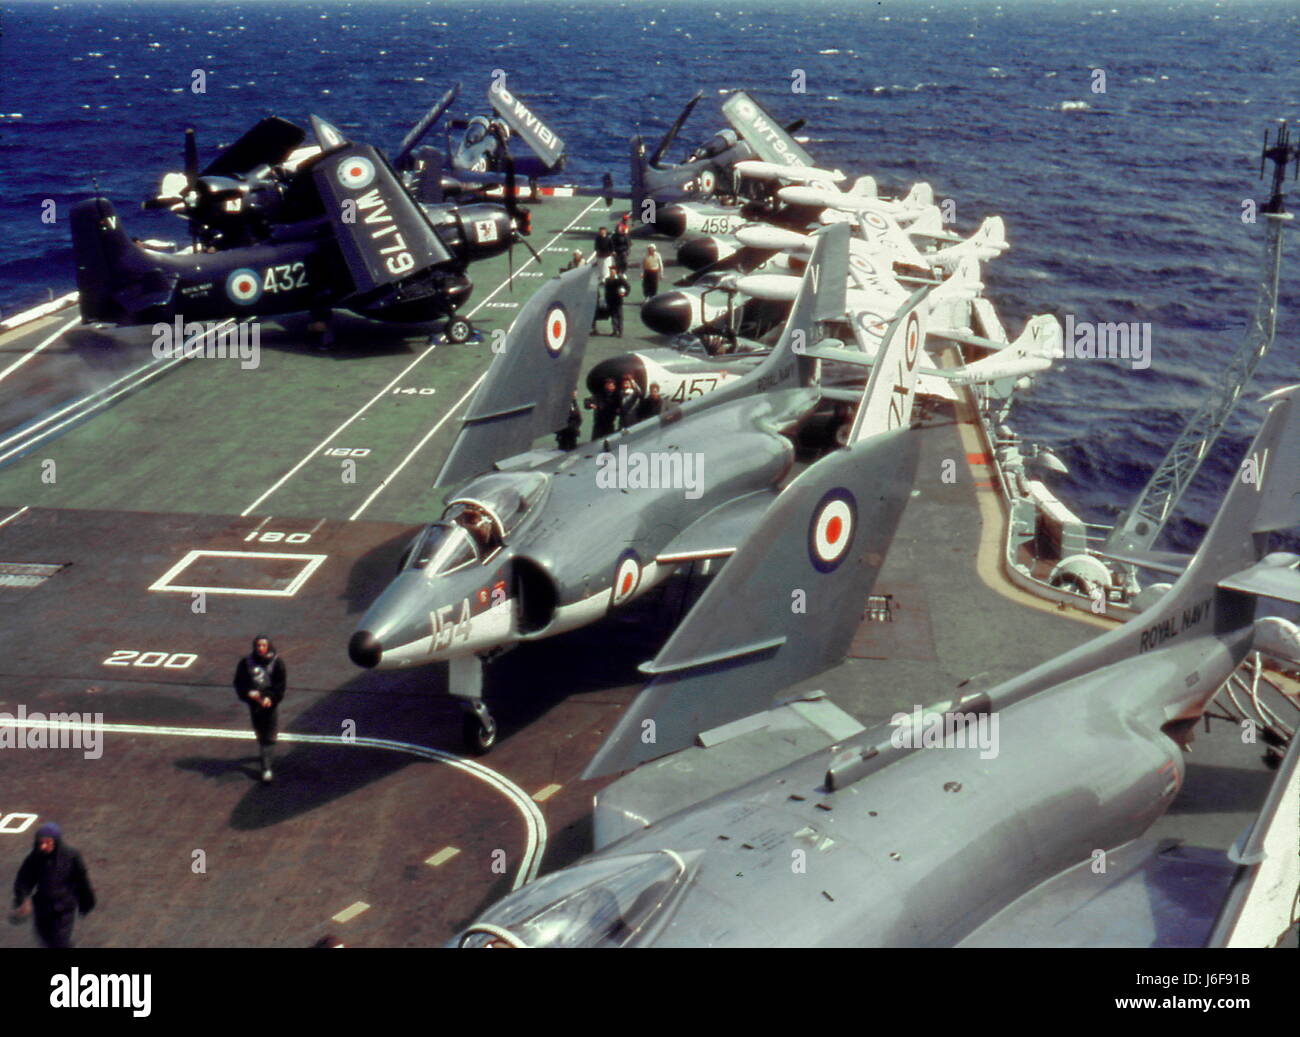 AJAXNETPHOTO. 1960S. AT SEA. - HMS VICTORIOUS. - FLIGHT DECK. CIRCA EARLY 1960S ship scrapped in 1969.  PHOTO:VIV TOWNLEY/AJAX REF:38 31 Stock Photo